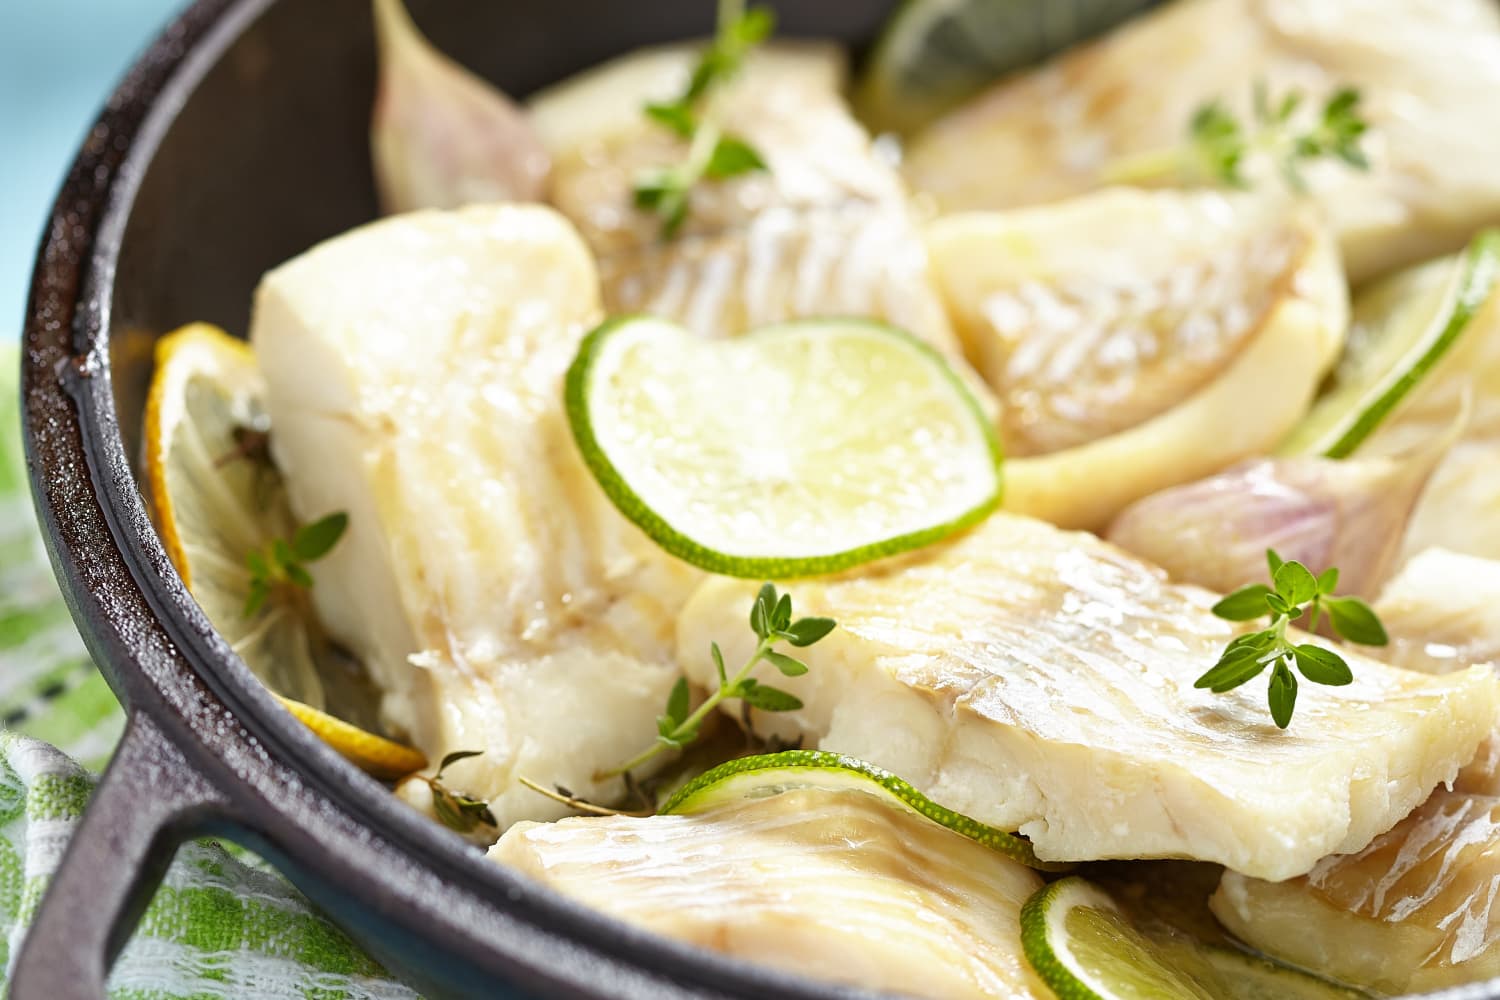 How to Choose the Best White Fish for a Recipe